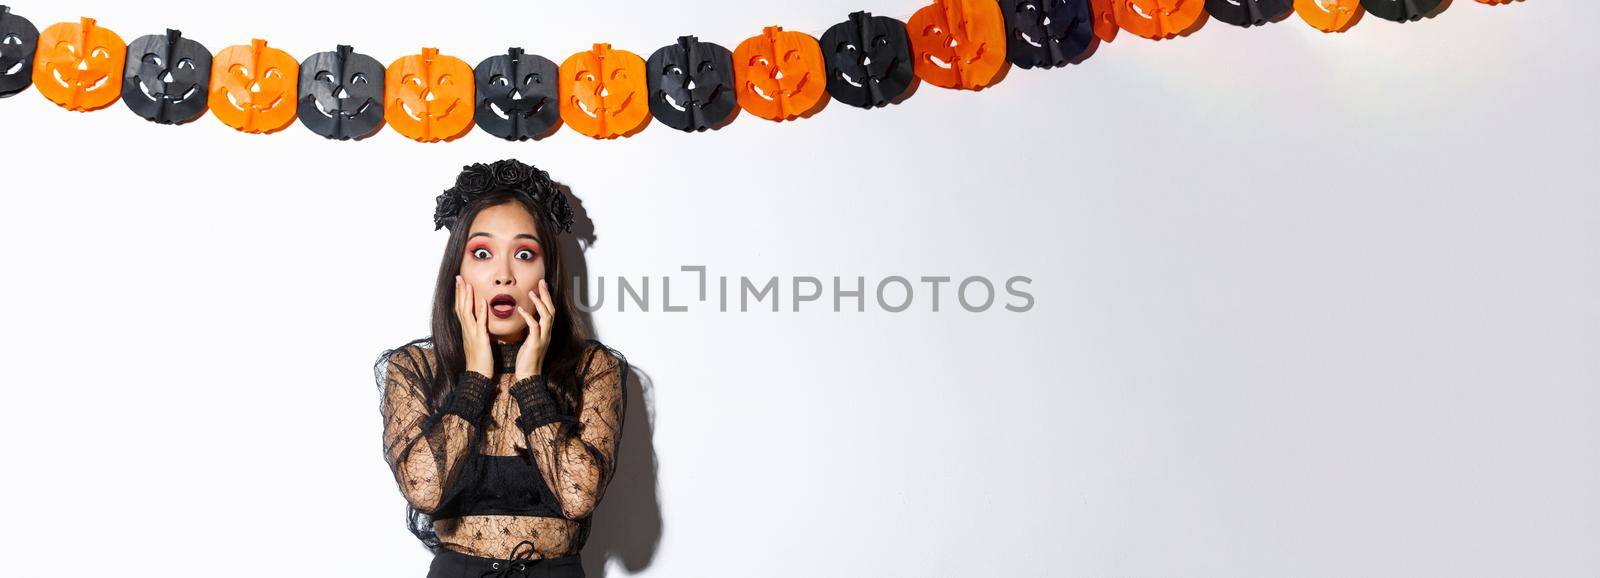 Image of woman in witch costume looking scared, express horror or fear while standing over white background with pumpkin banners decoration, celebrating halloween.